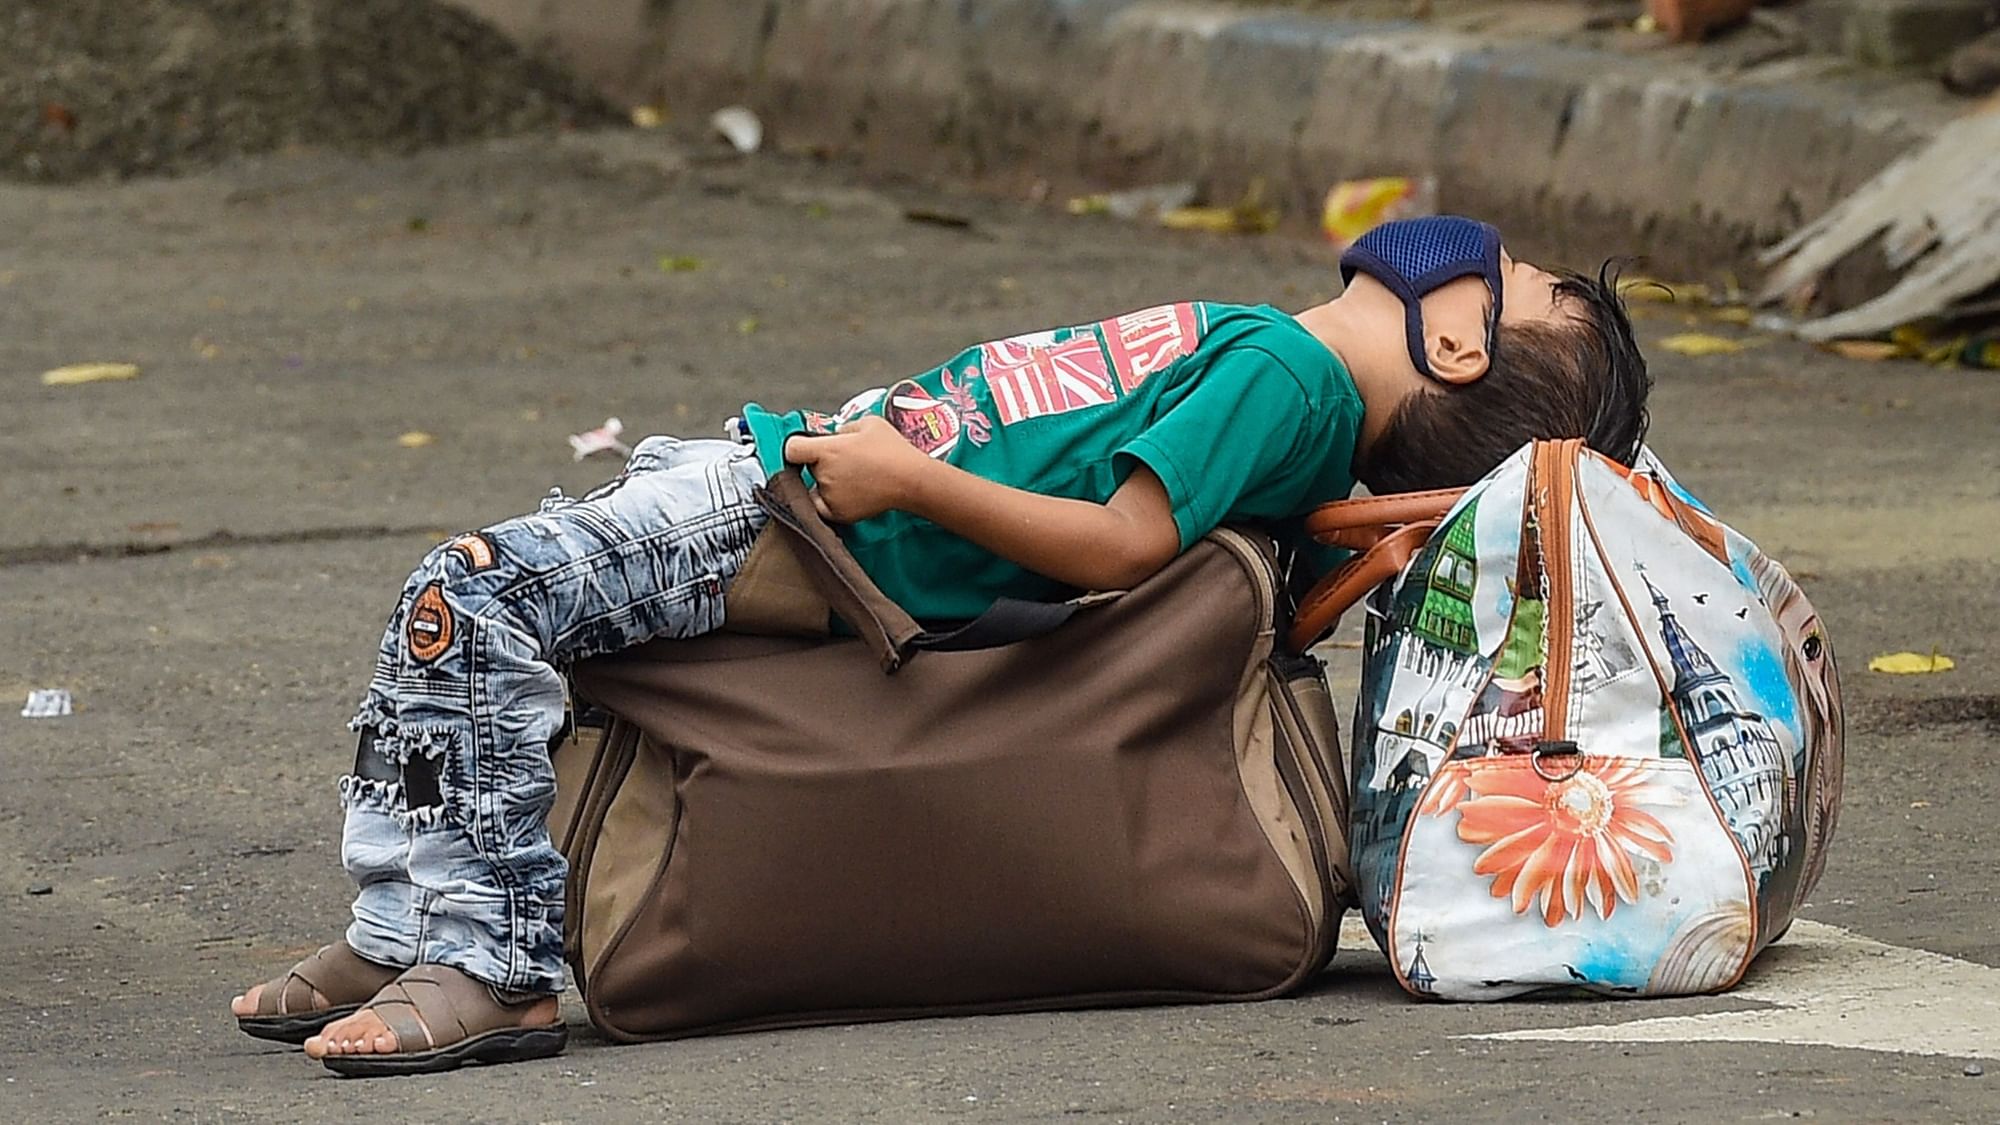 A boy takes rest on the luggage along a road, during Unlock 2.0, in Kolkata.